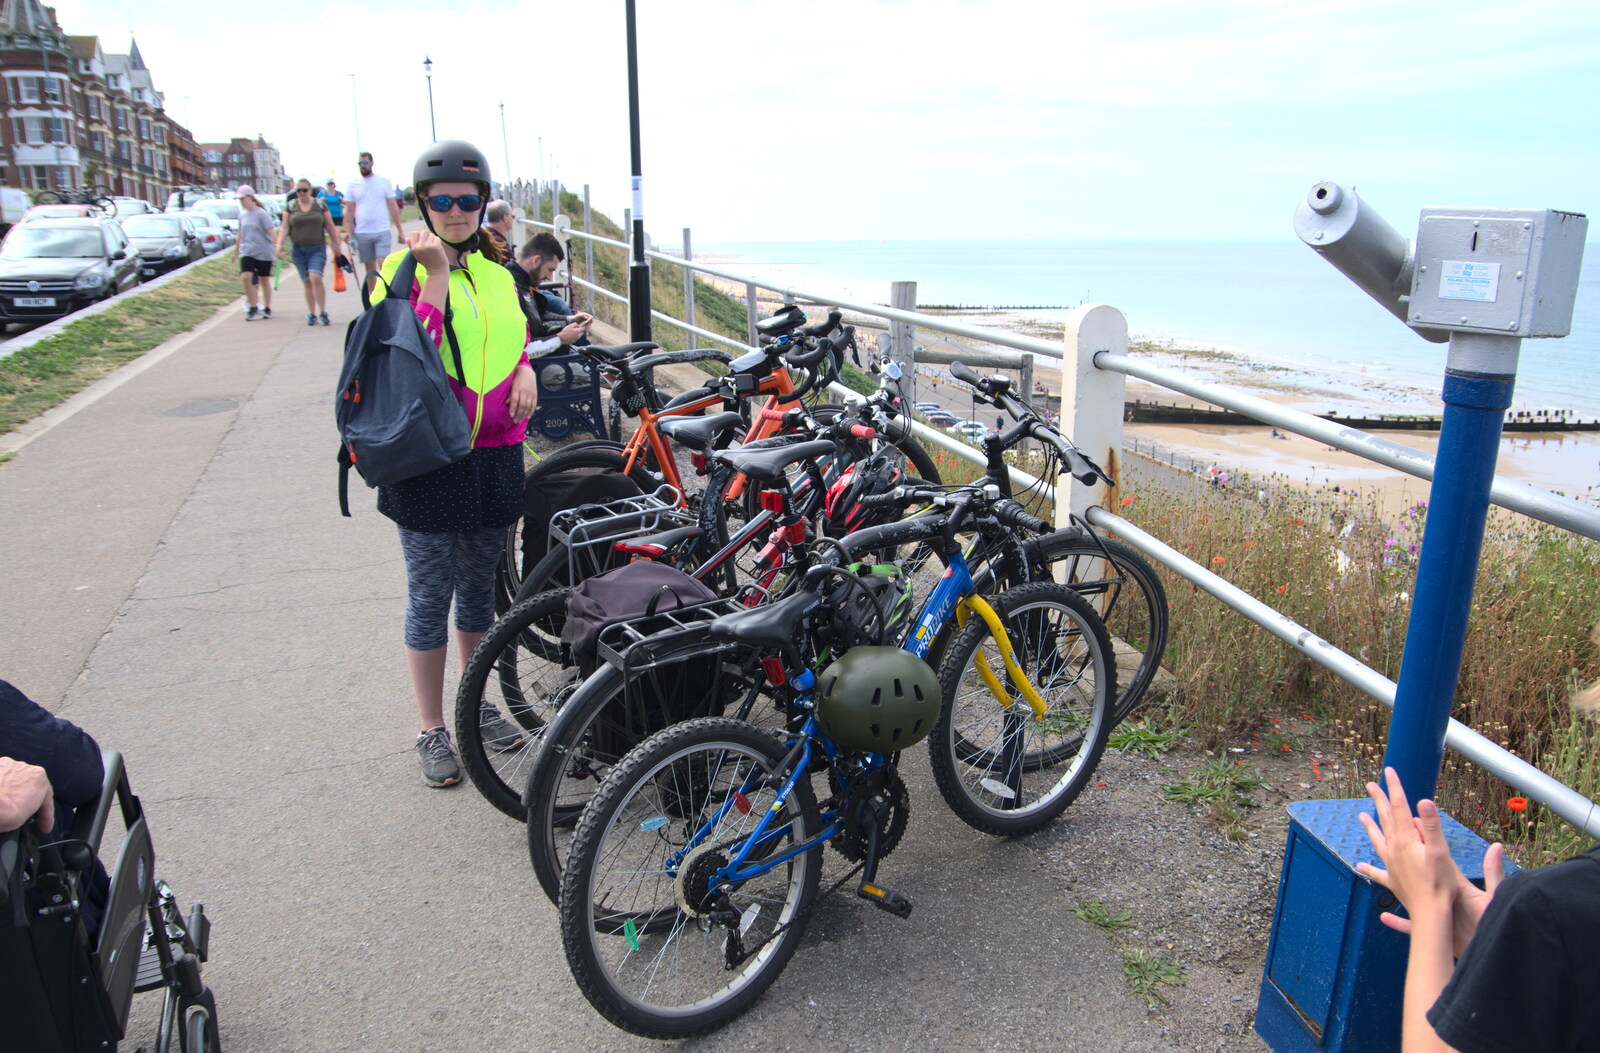 Our pile of bikes from Camping on the Coast, East Runton, North Norfolk - 25th July 2020